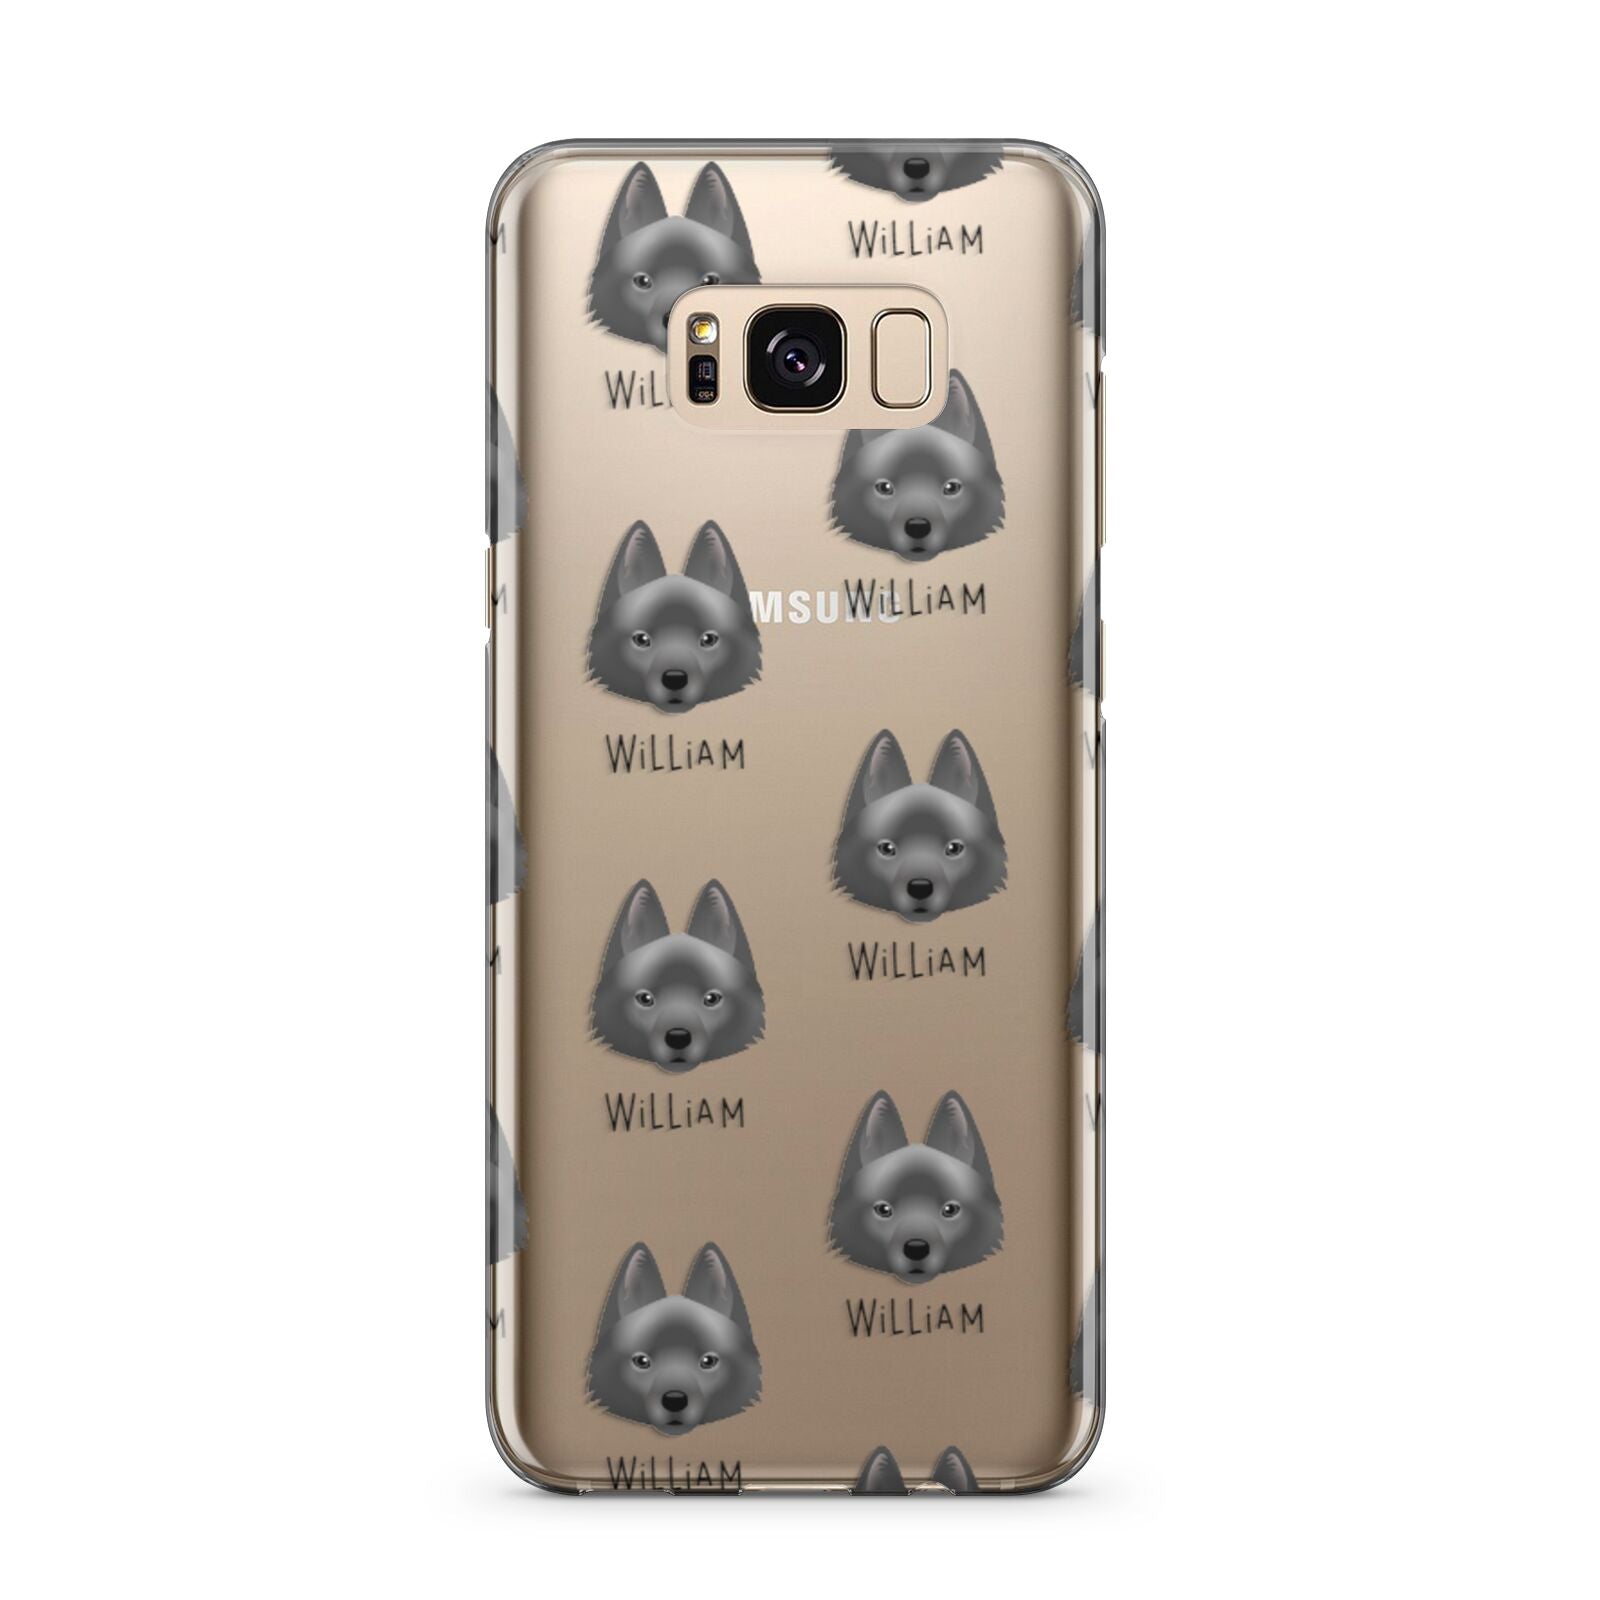 Schipperke Icon with Name Samsung Galaxy S8 Plus Case